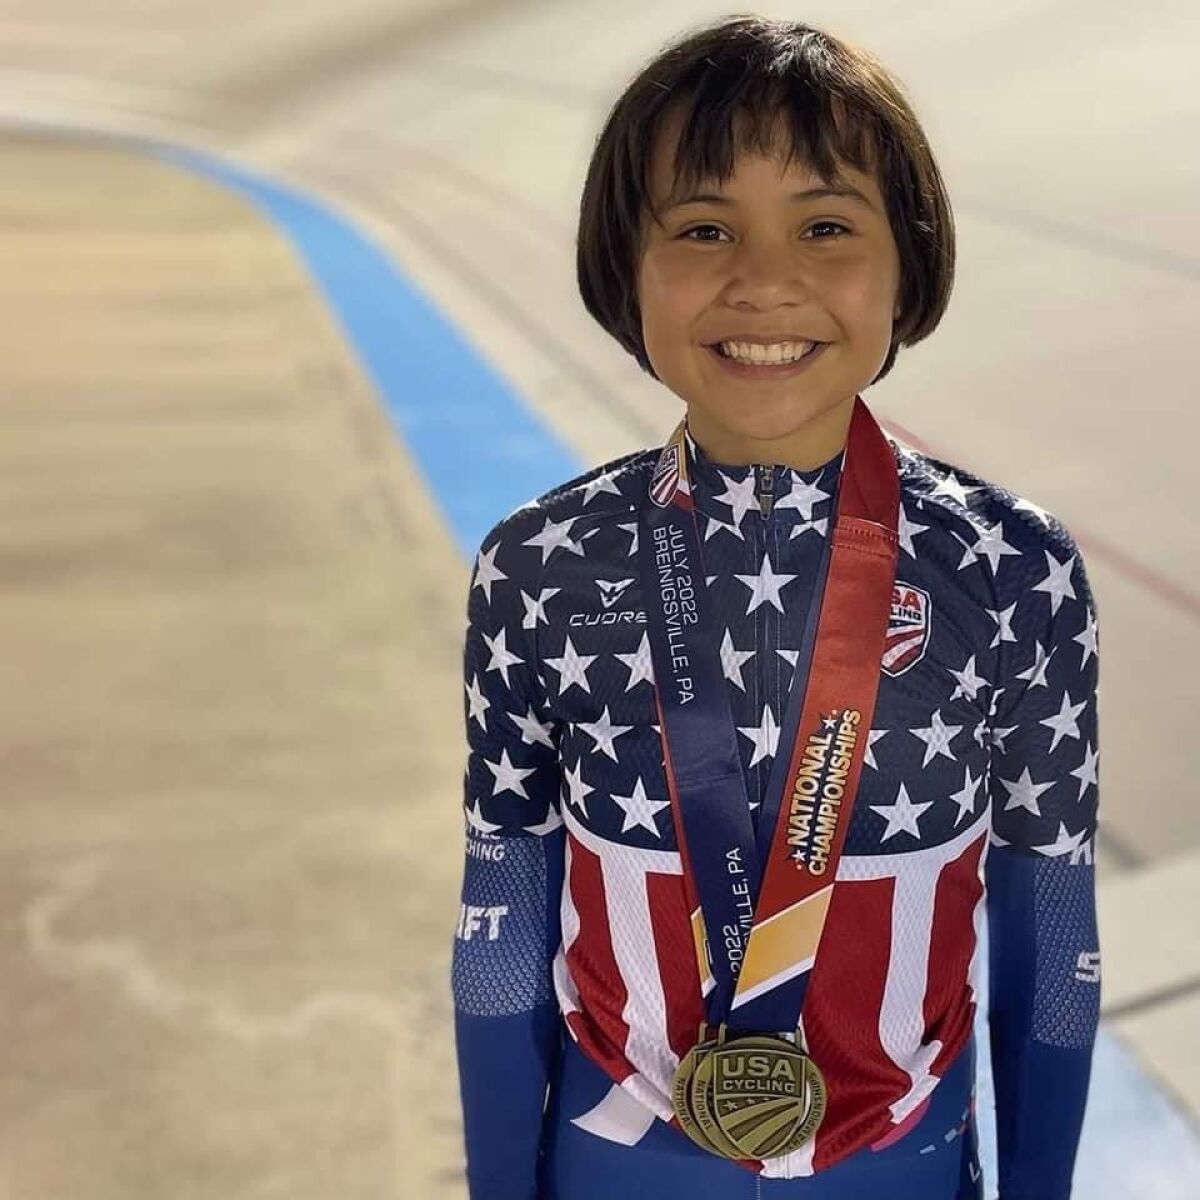 Aine Chen won USA Cycling National both on the road and on the track.